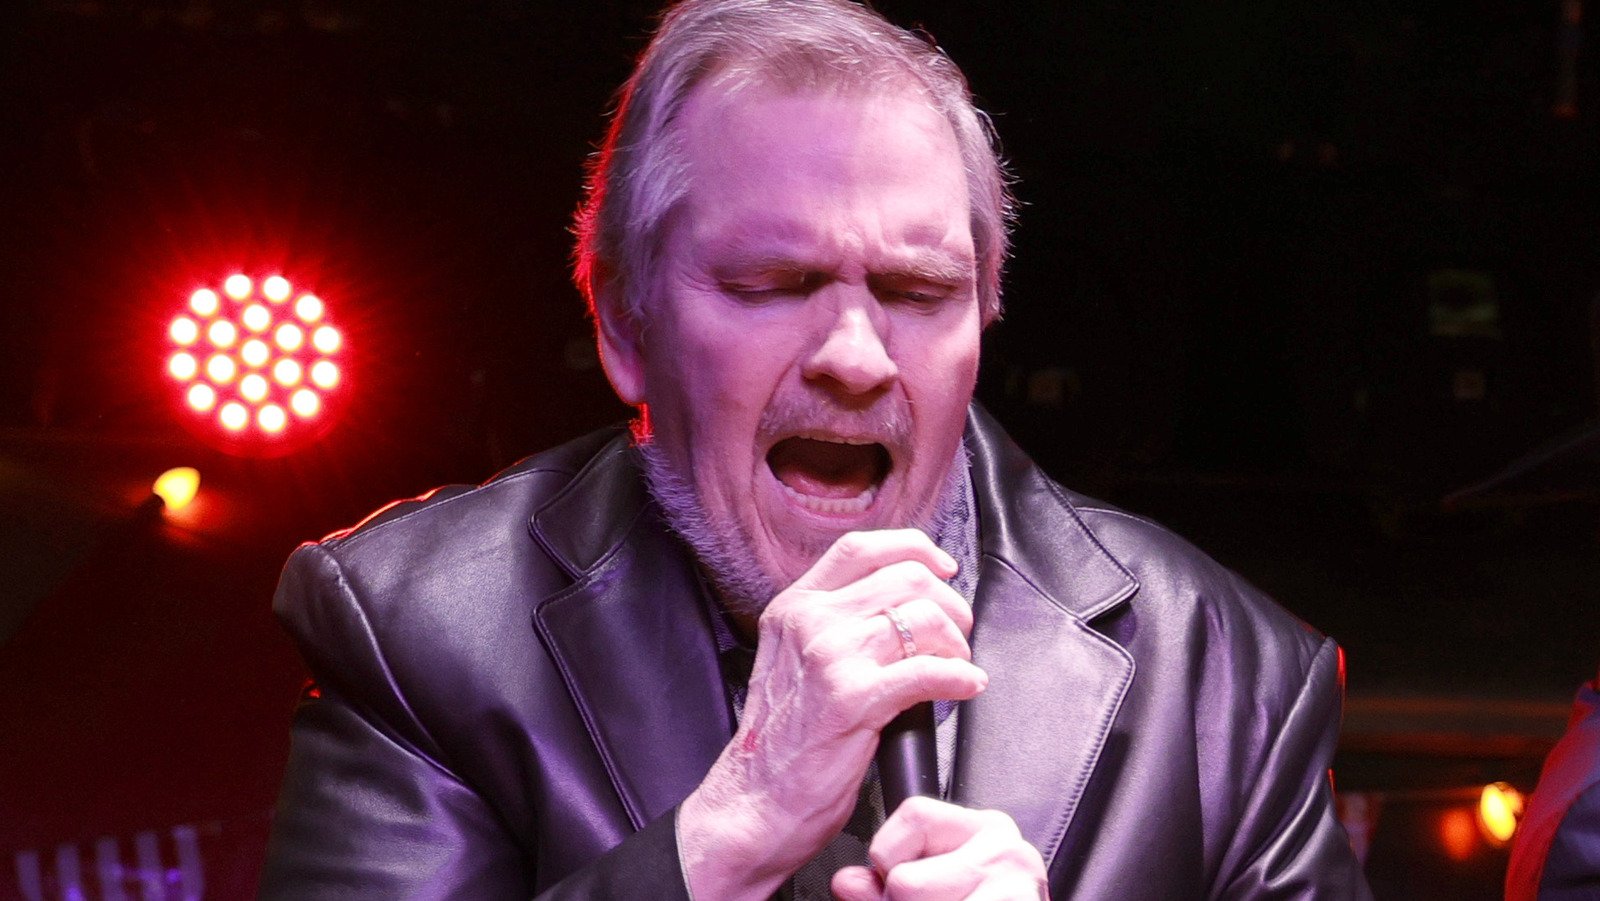 Meat Loaf, Legendary Rock Singer And Rocky Horror Picture Show Star, Has Died At 74 - /Film